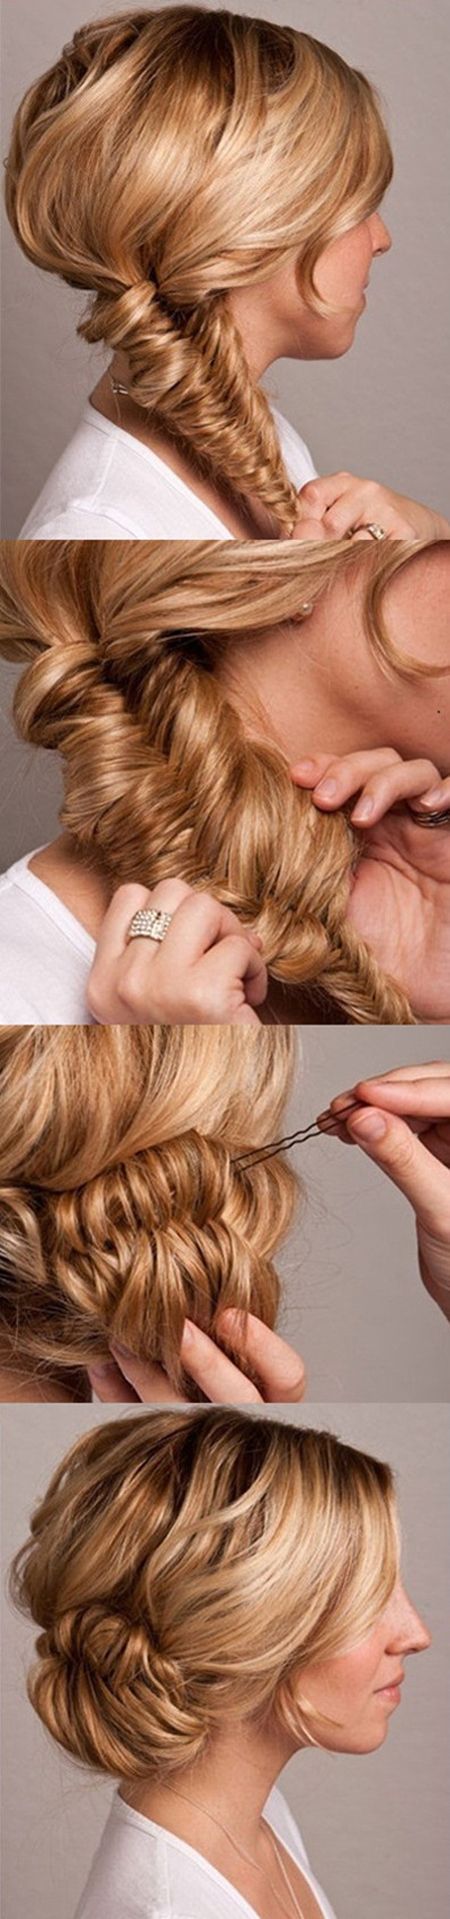 24 holiday hairstyle-This one looks cool, but who has time to fishbone their hair before doing an updo???